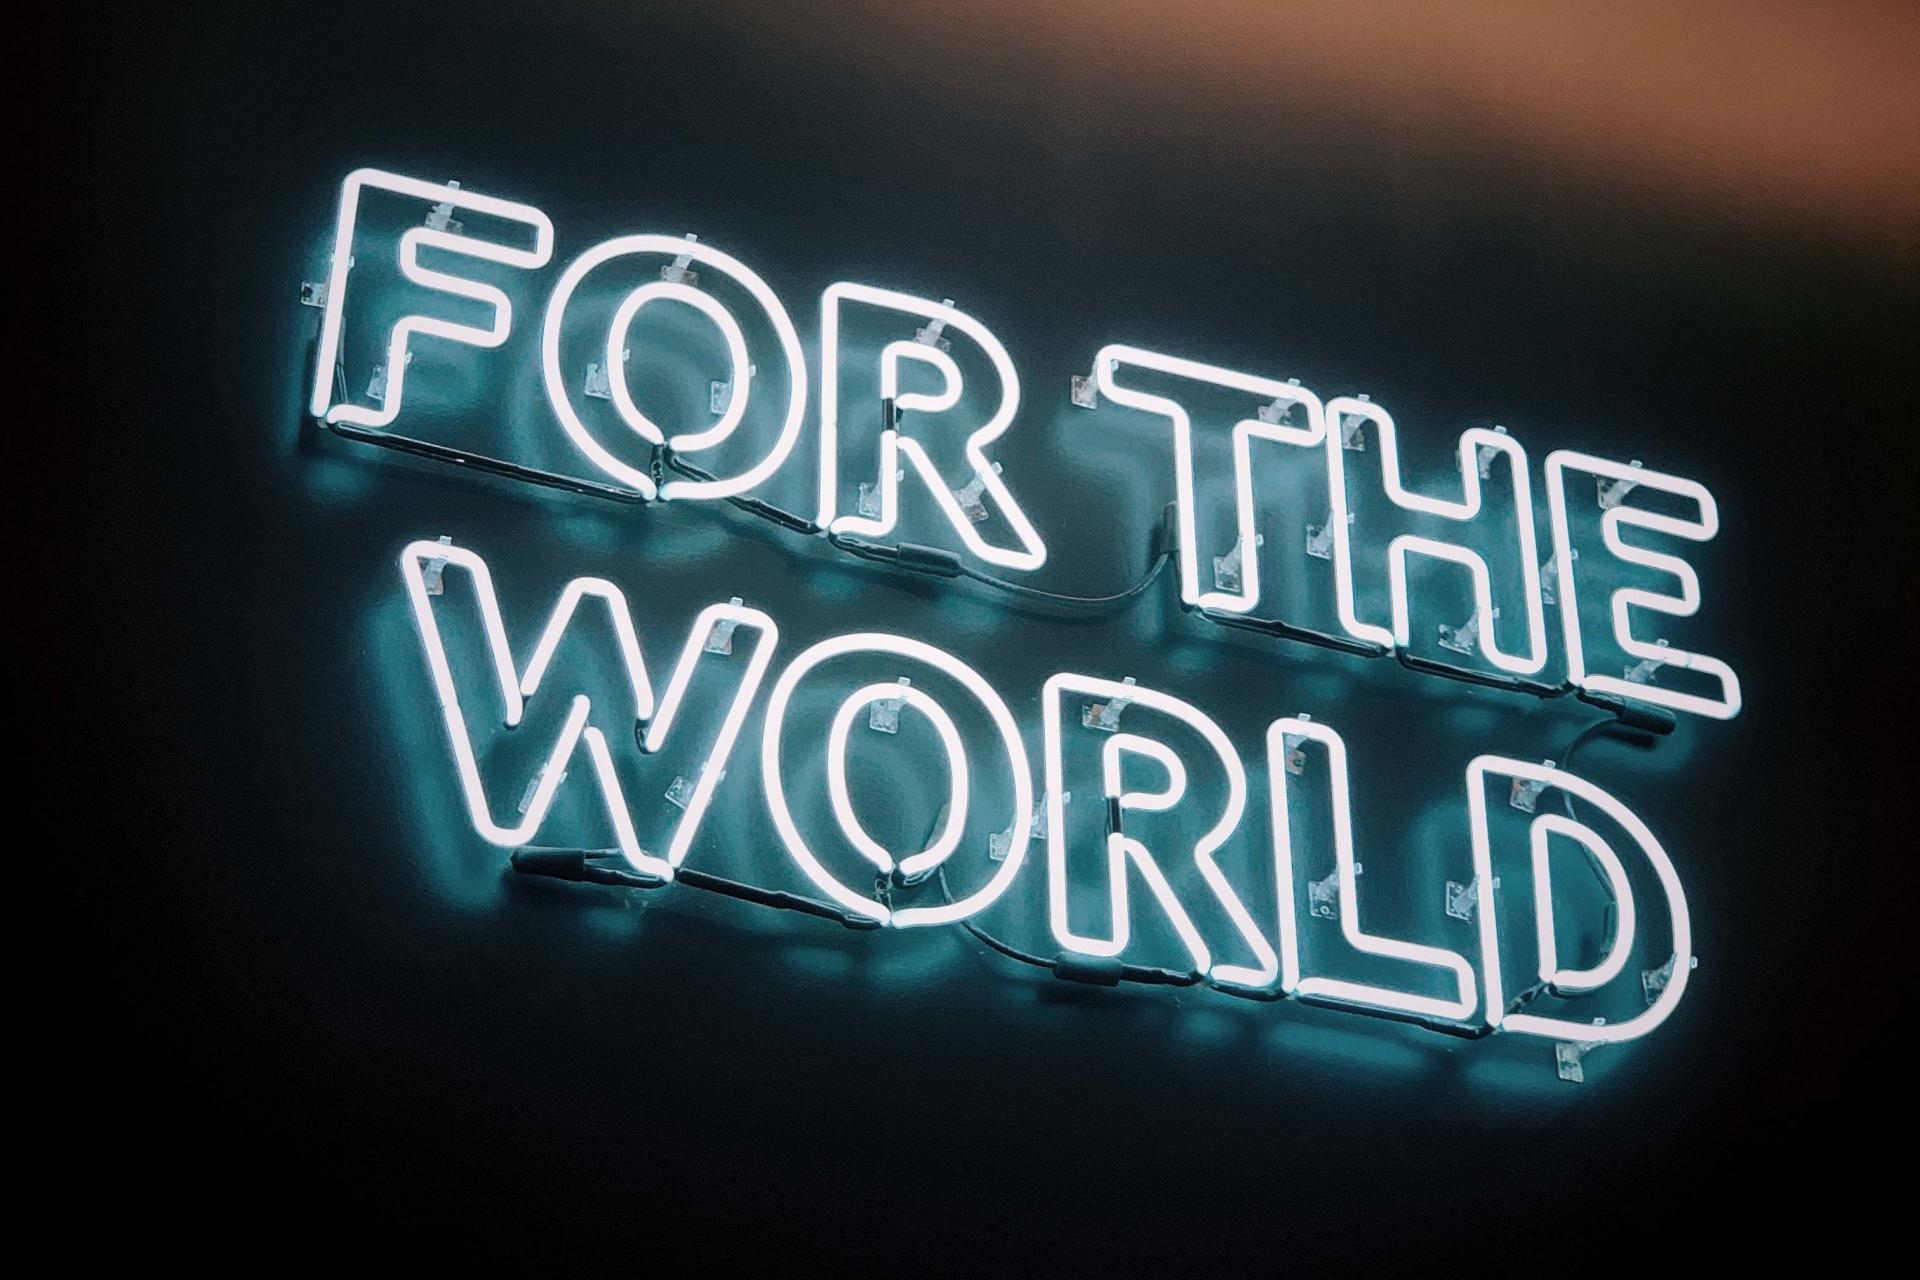 For the world neon sign